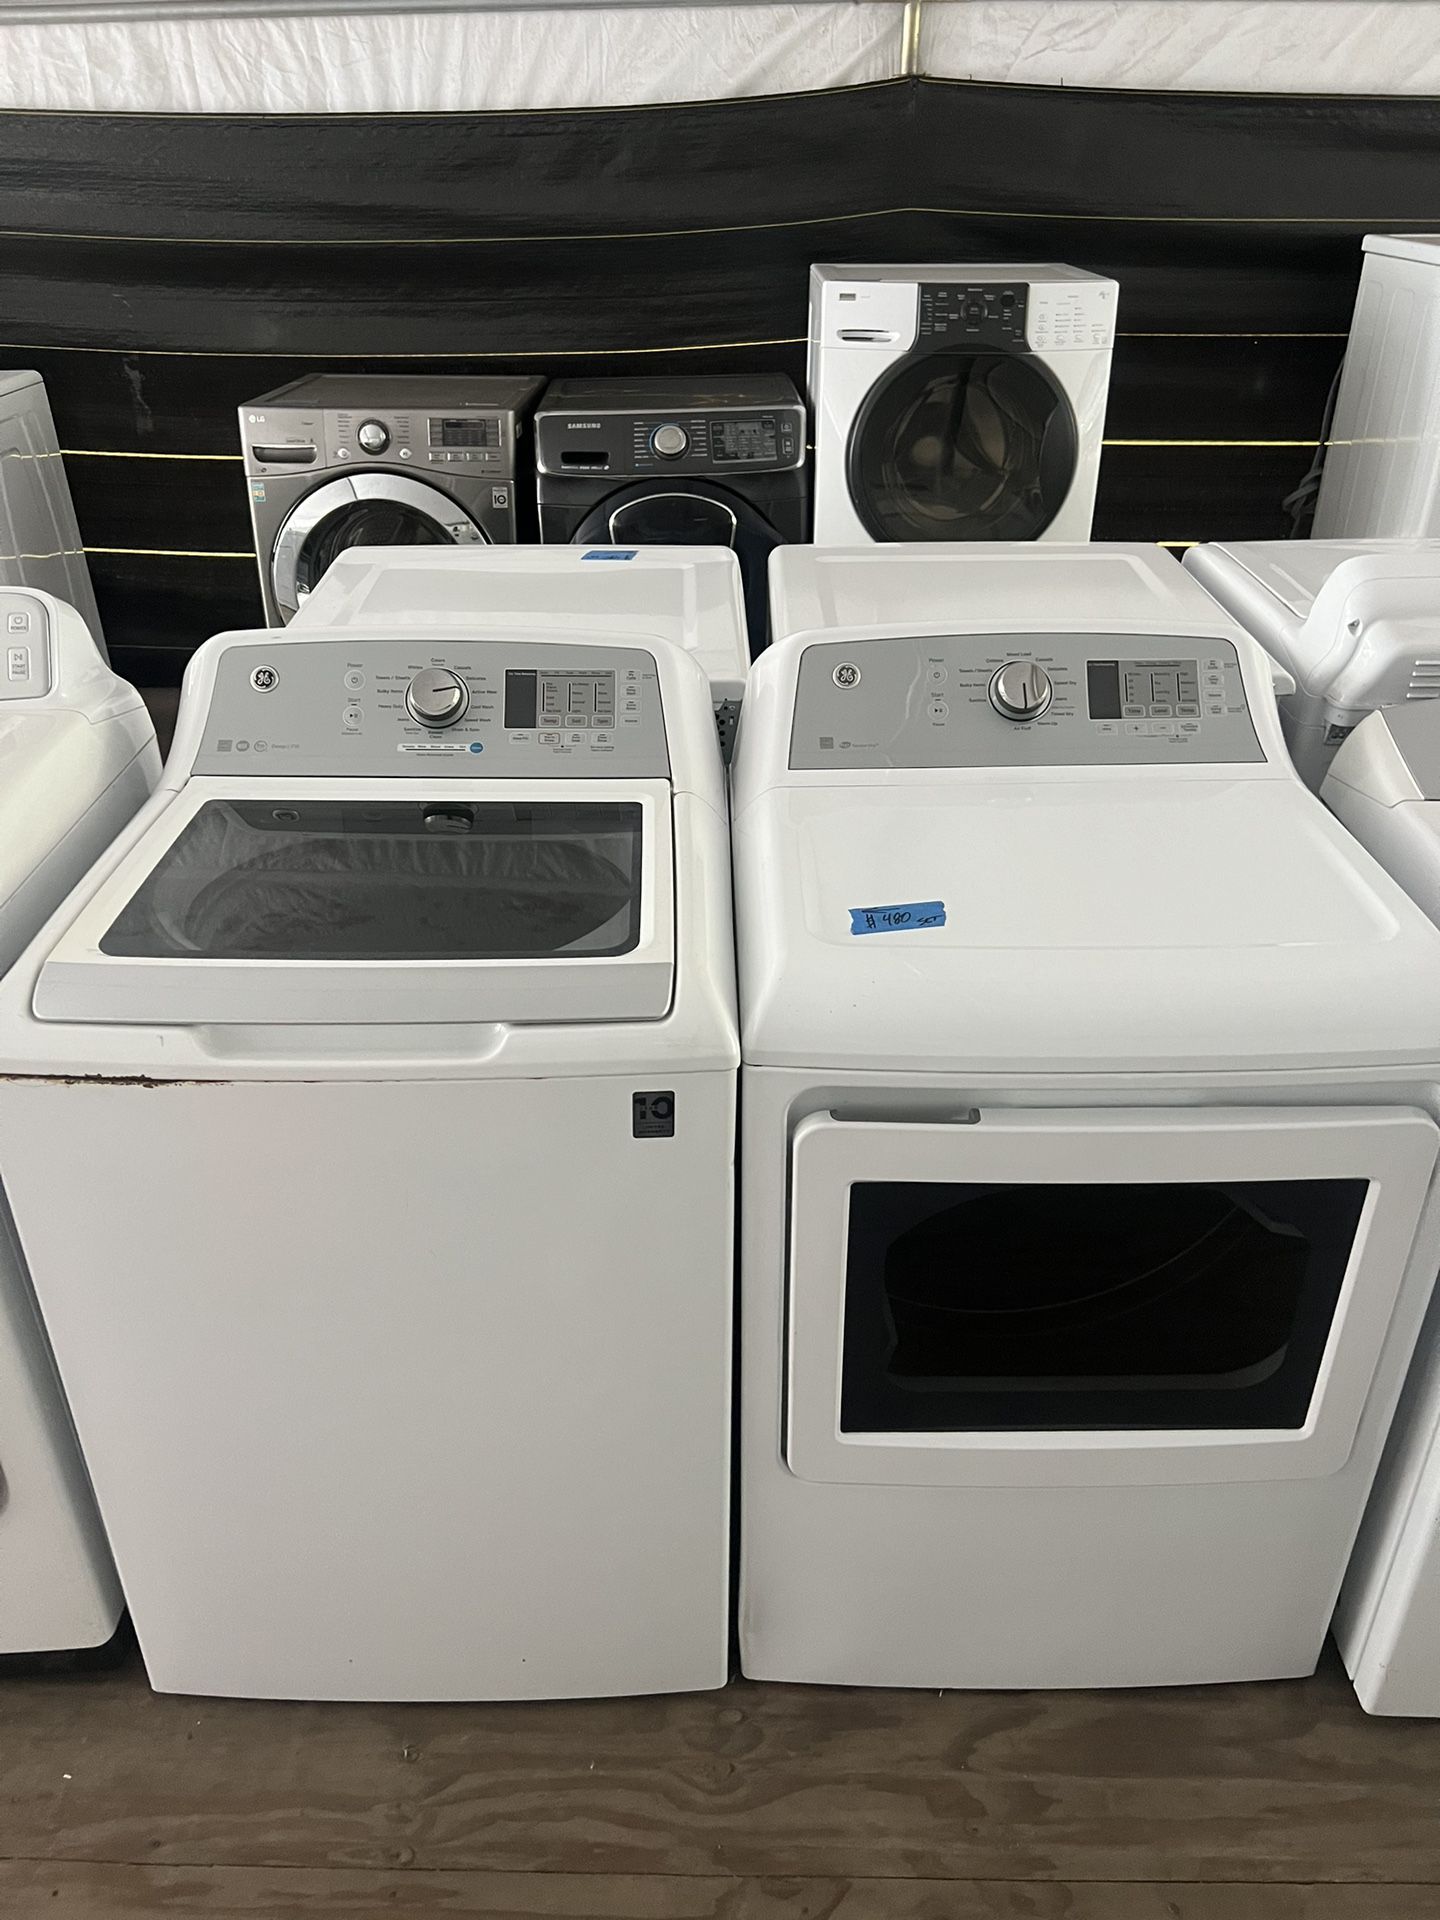 Ge Washer&dryer Large Capacity Set 60 day warranty/ Located at:📍5415 Carmack Rd Tampa Fl 33610📍